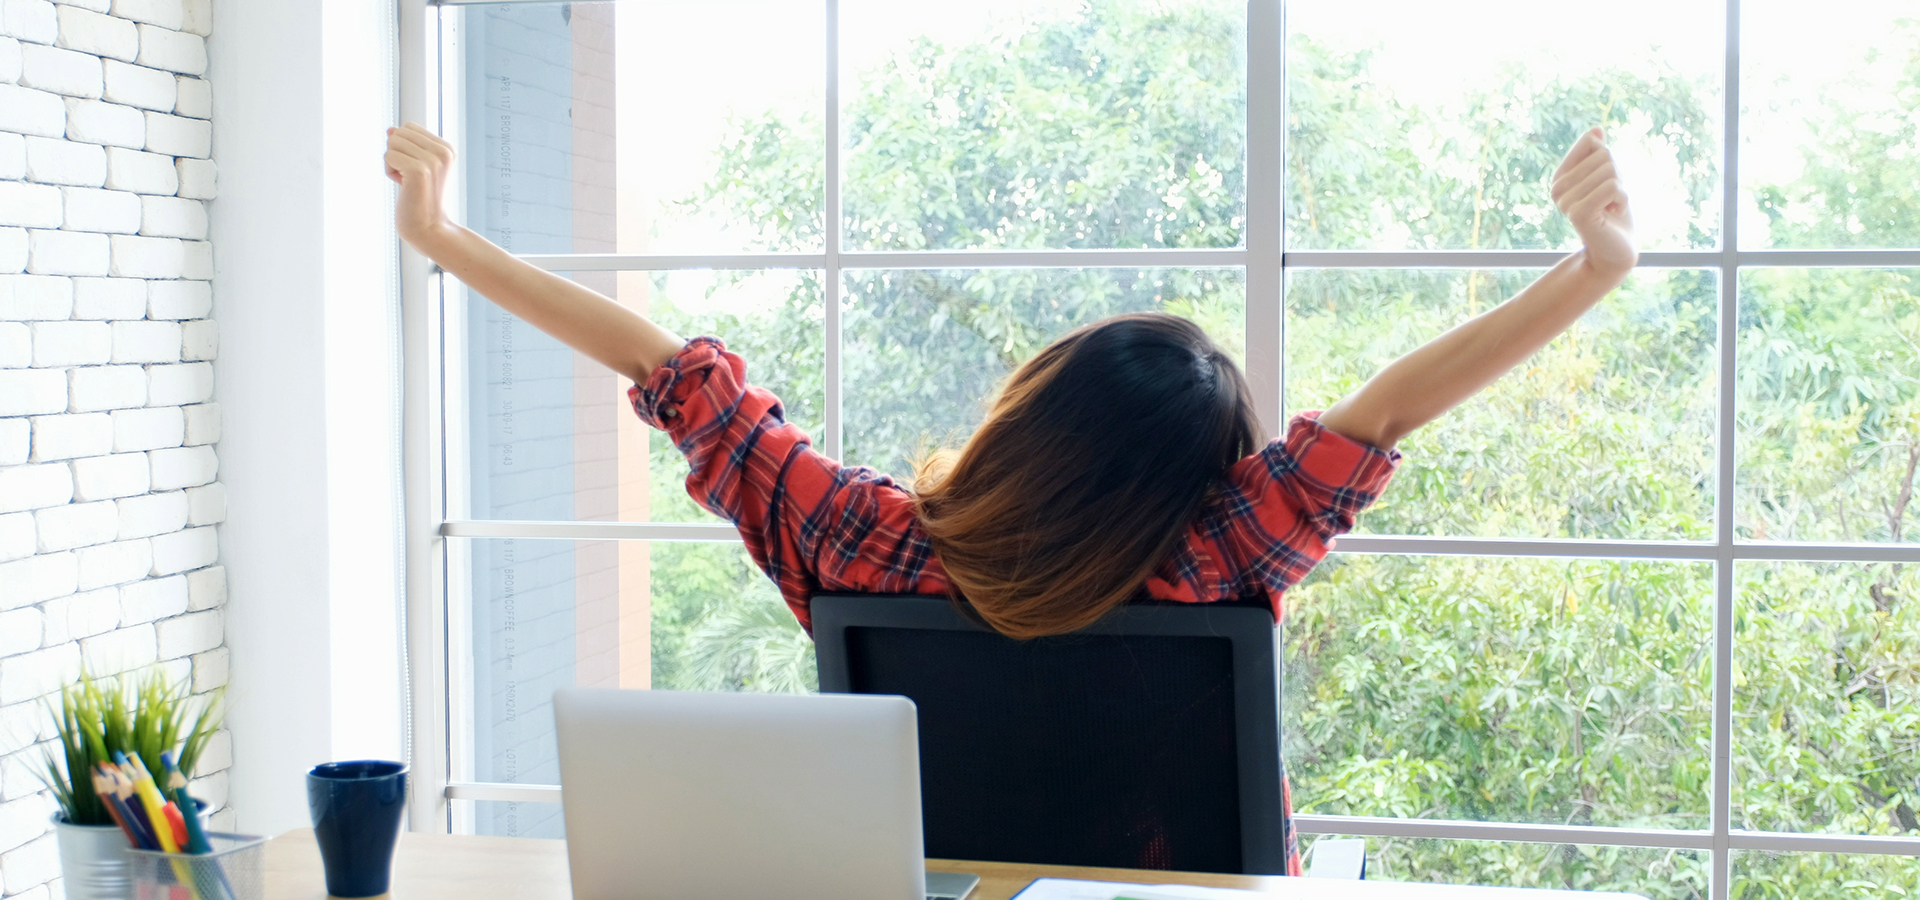 How to transform your day by stretching at work